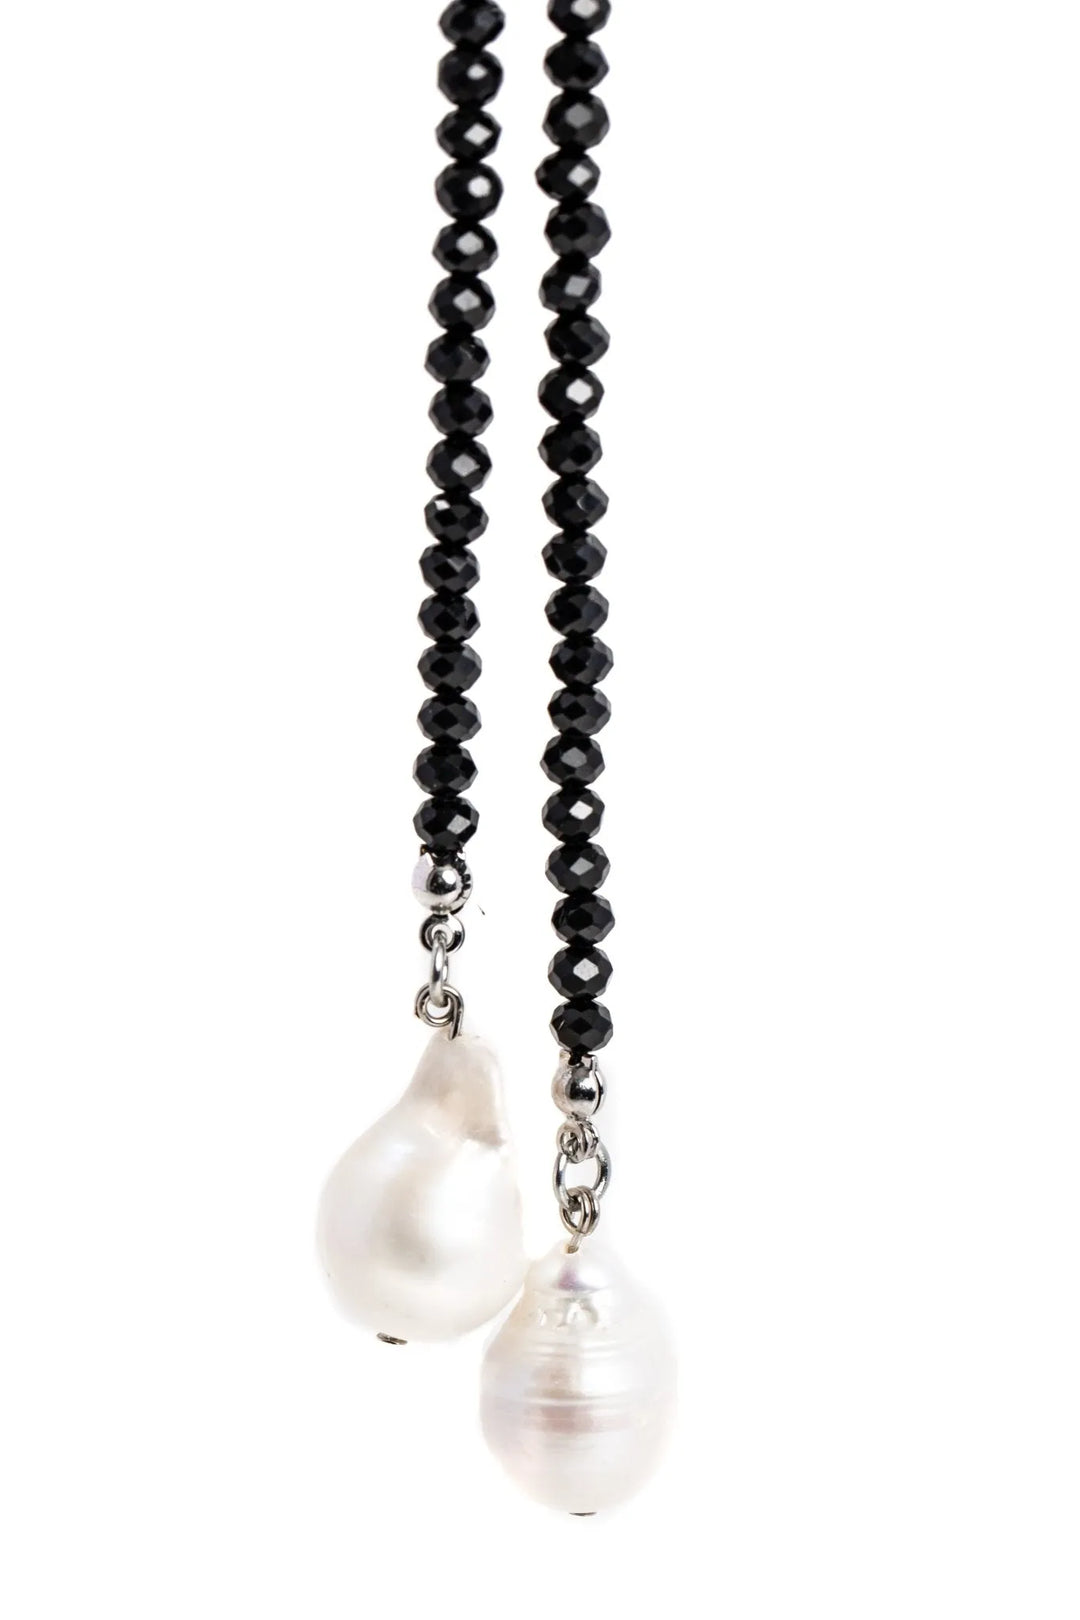 Baroque Knotted Pearl Necklace Black